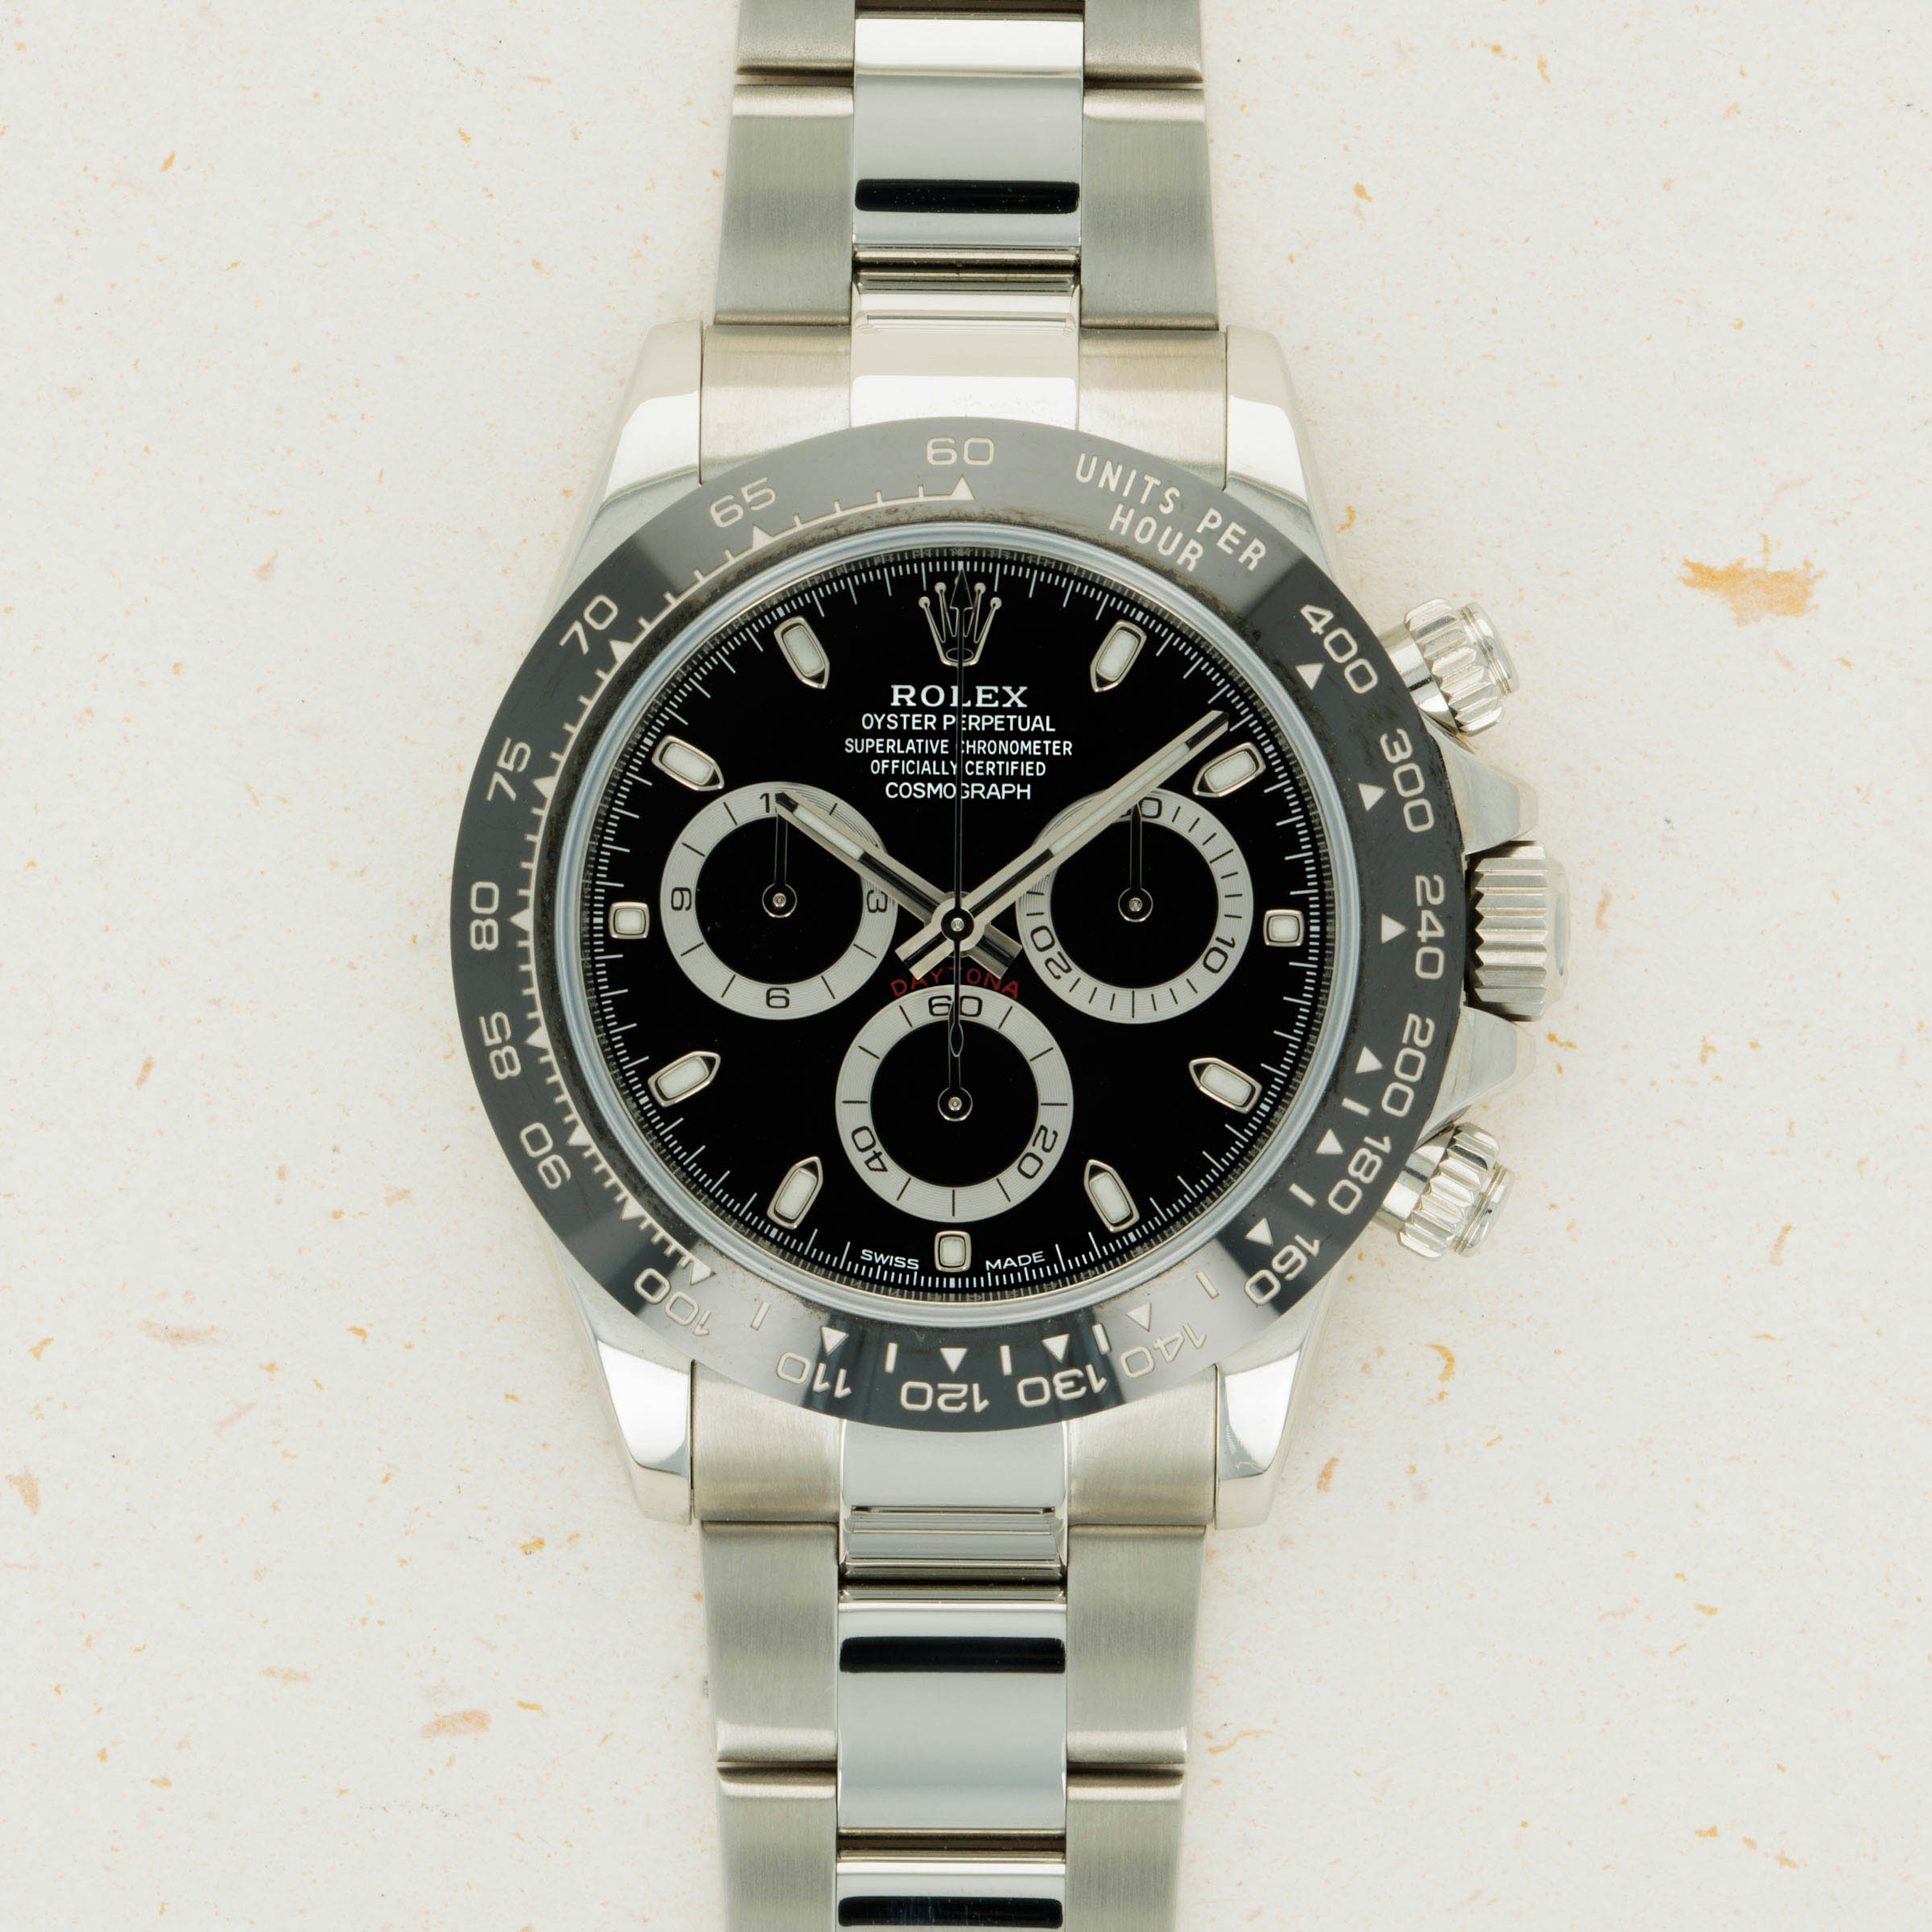 Thumbnail for Rolex Daytona 116500LN Black Dial Box and Papers